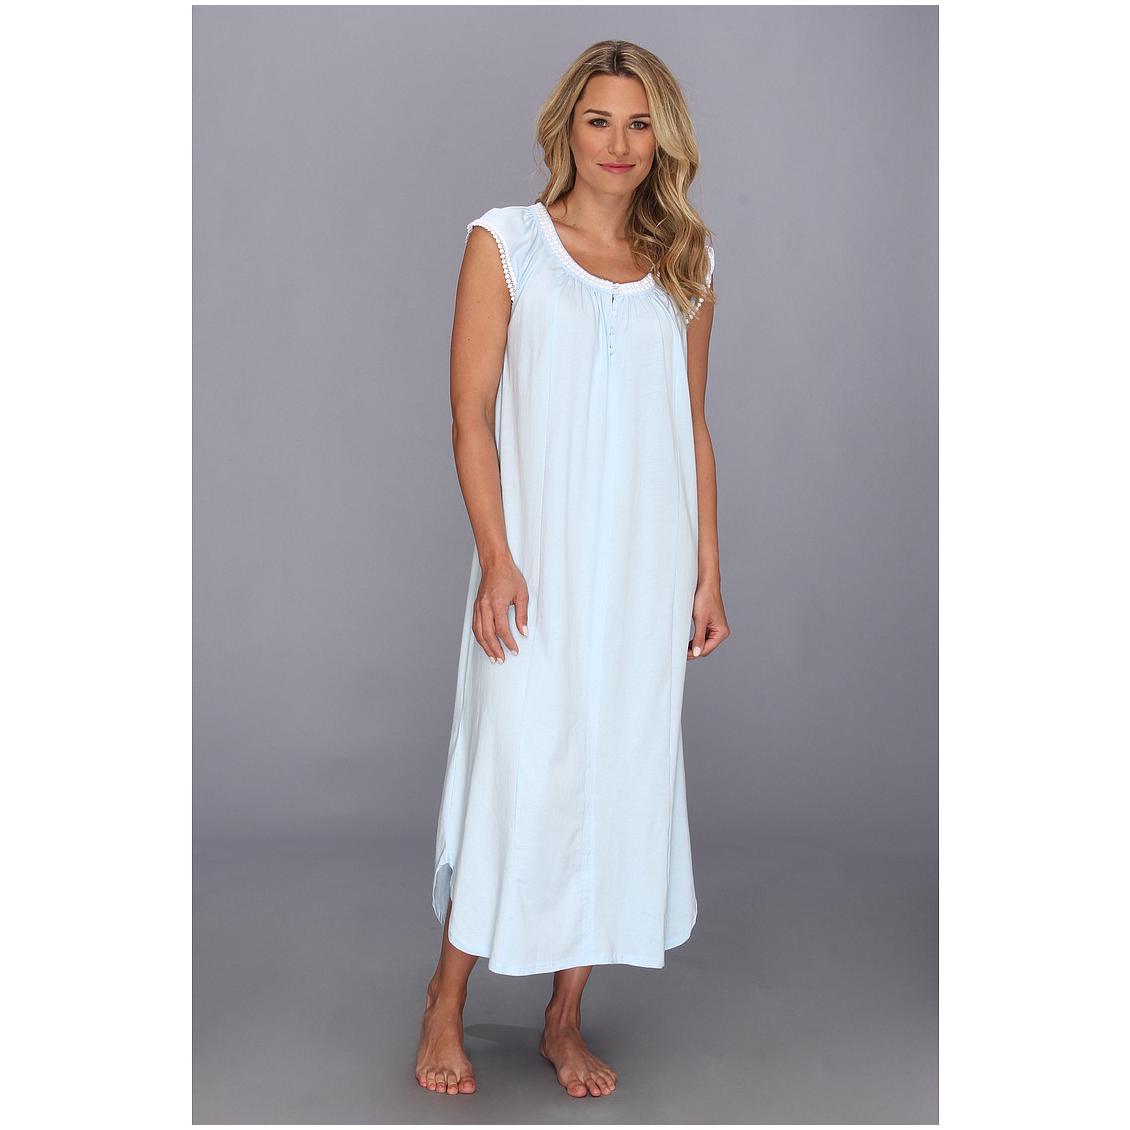 Women'S Plus Nightgowns & Clothes Review